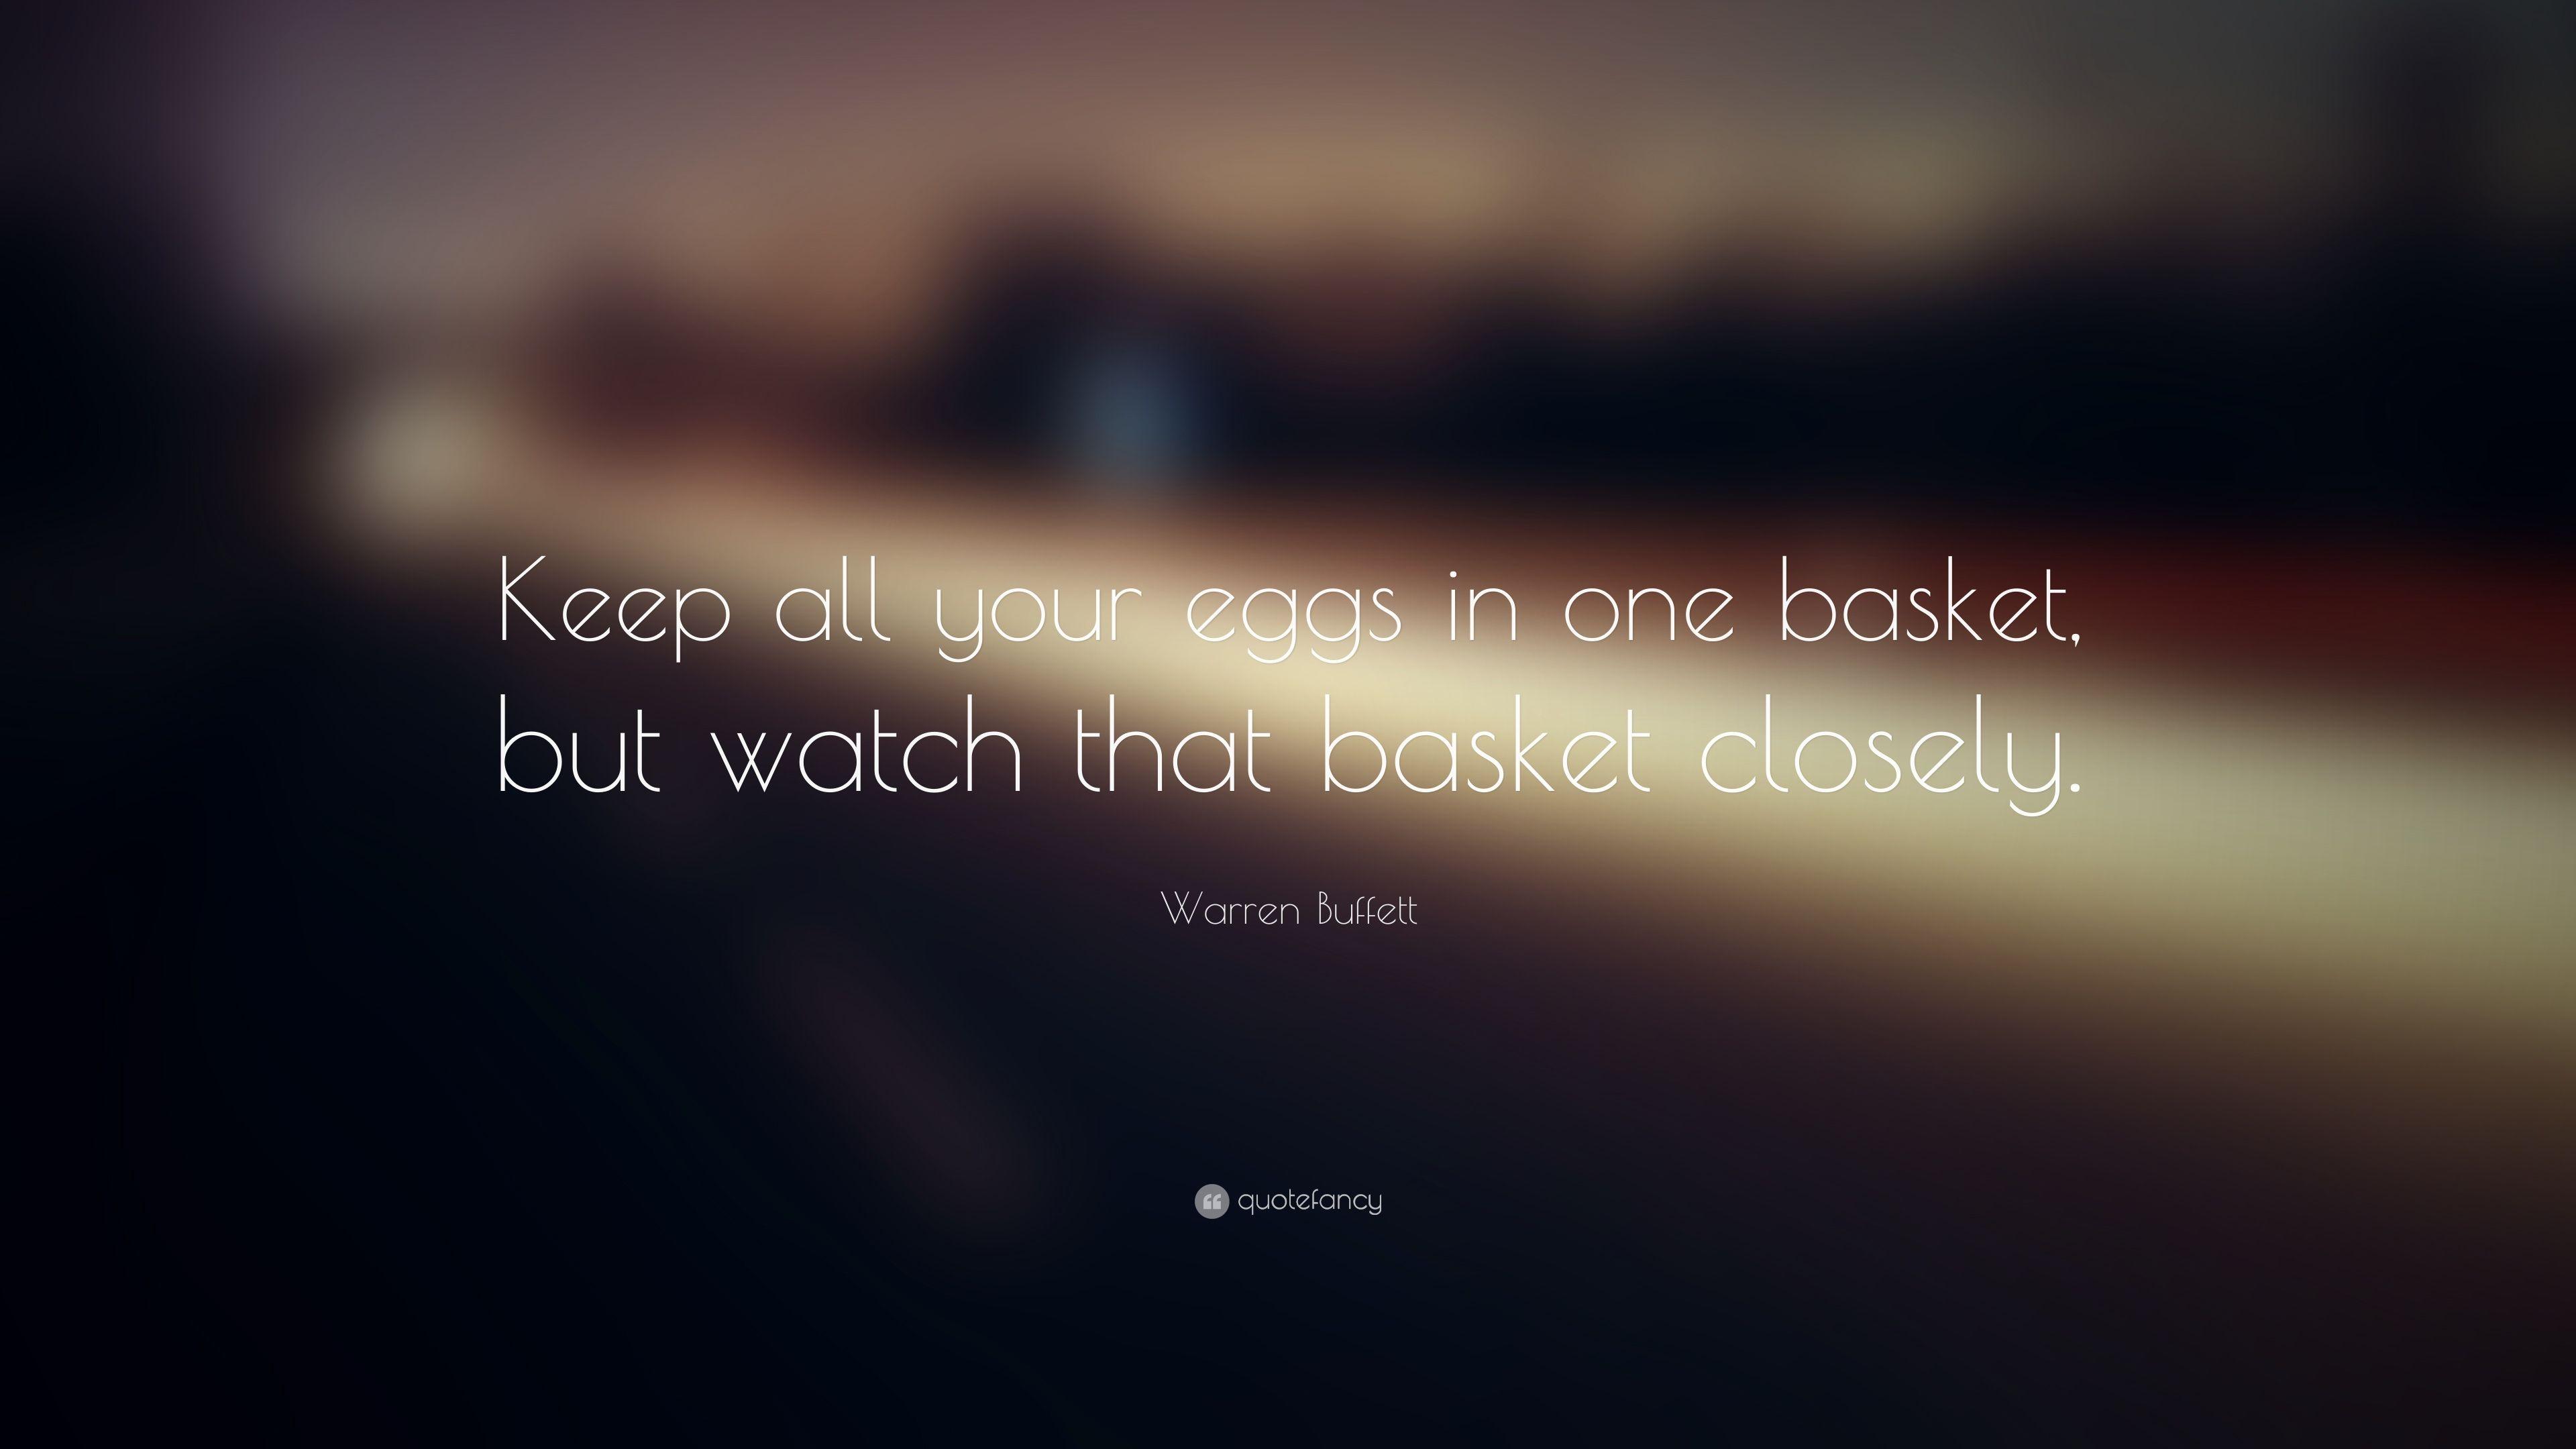 Warren Buffett Quote: “Keep all your eggs in one basket, but watch